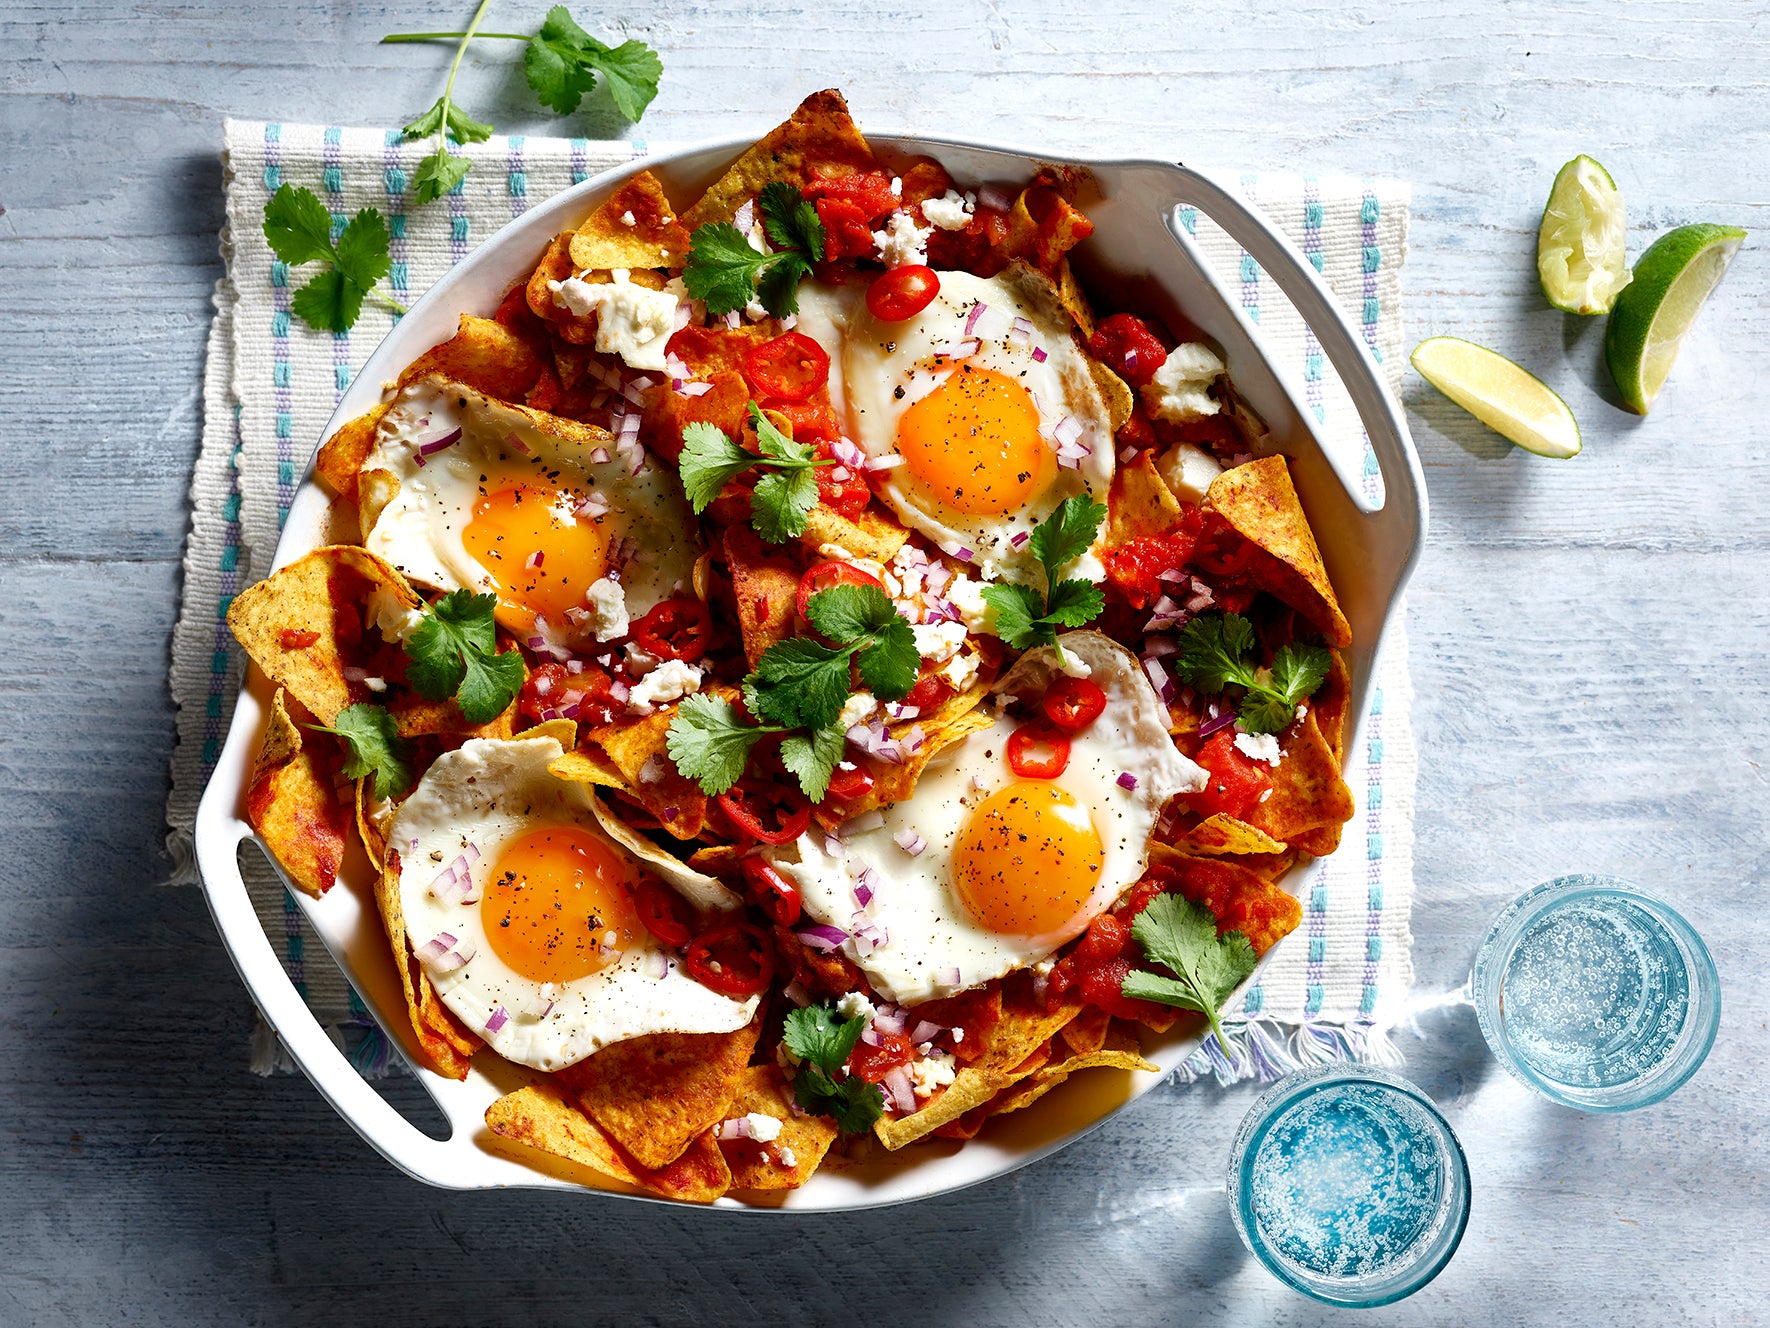 Perfect for sharing, these Mexican chilaquiles are a true lunchtime delight